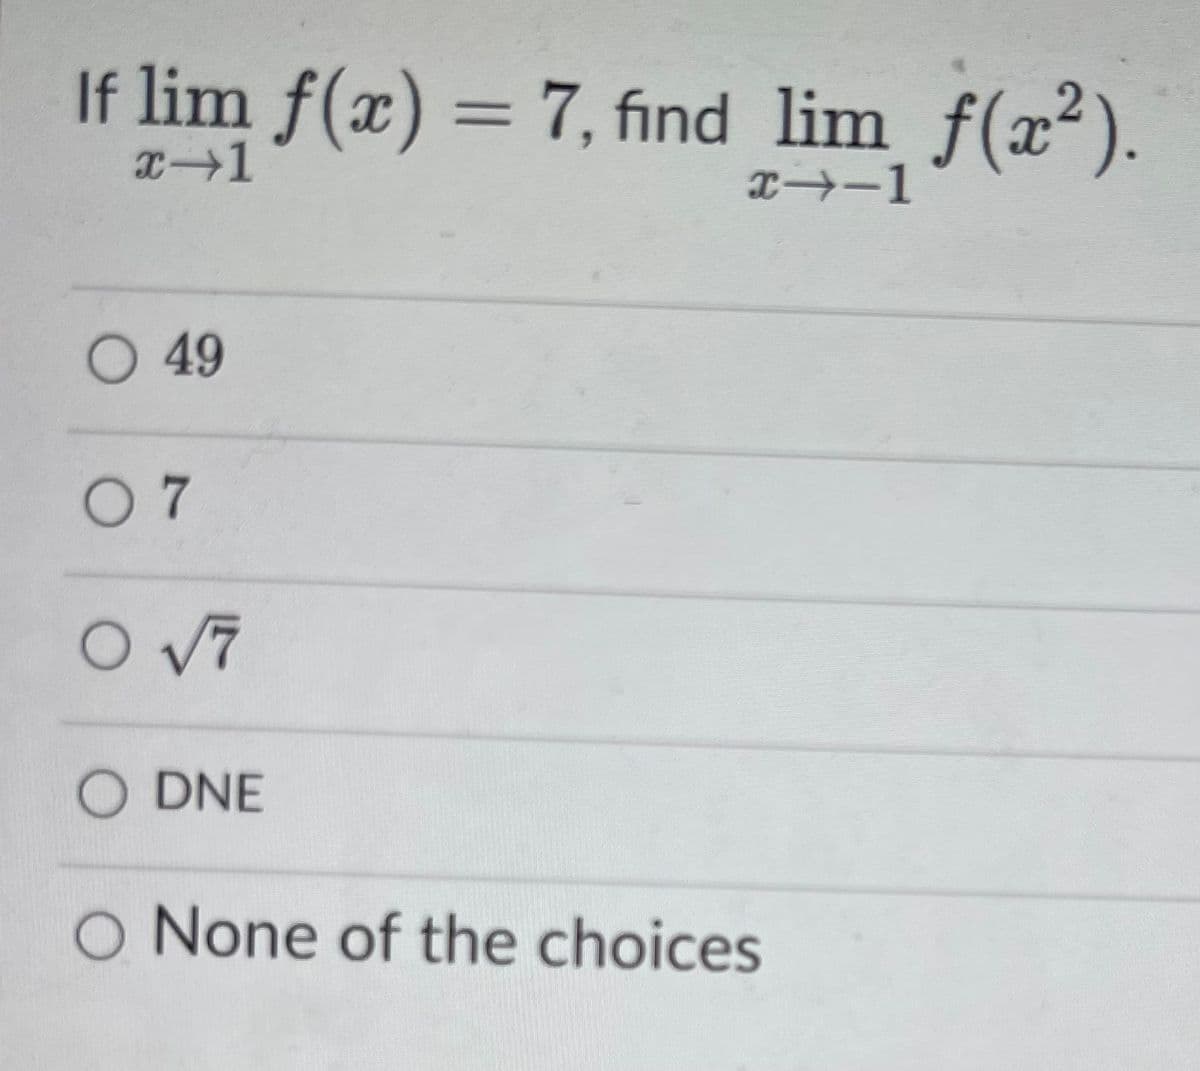 If lim f(x) = 7, find lim f(x²).
エ→-1
O 49
0 7
O V7
O DNE
O None of the choices
